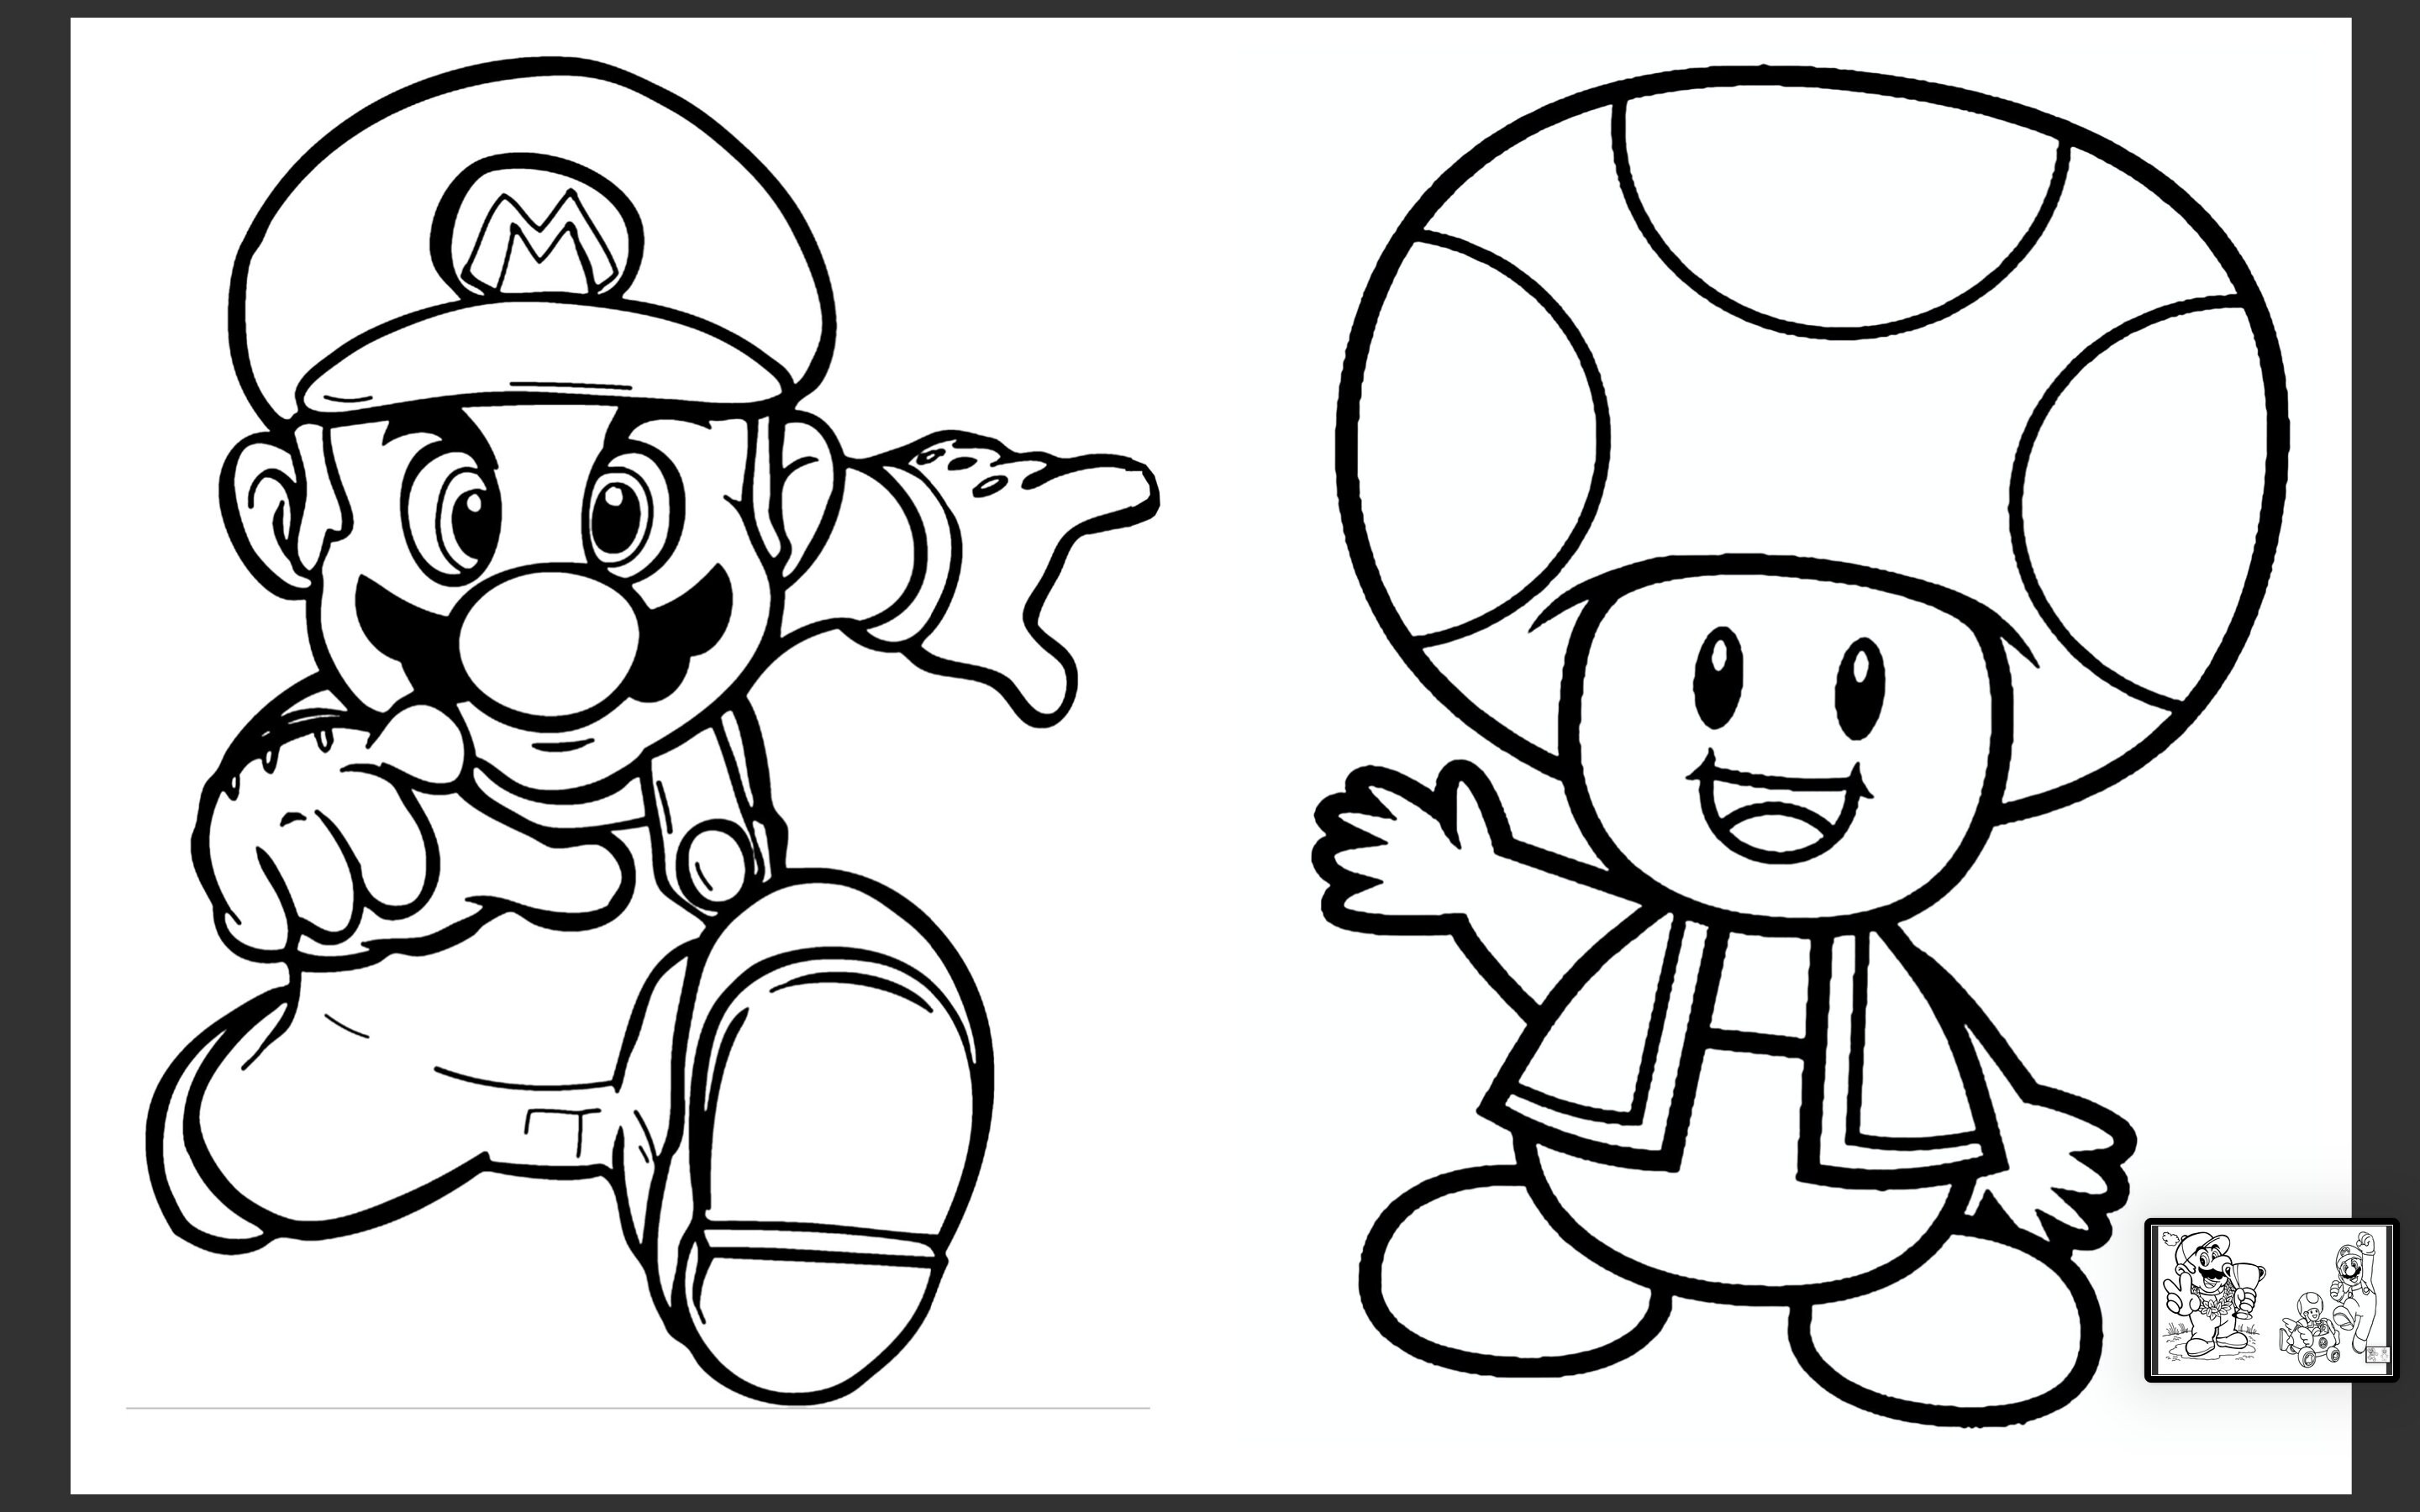 Mario Coloring Pages | Etsy